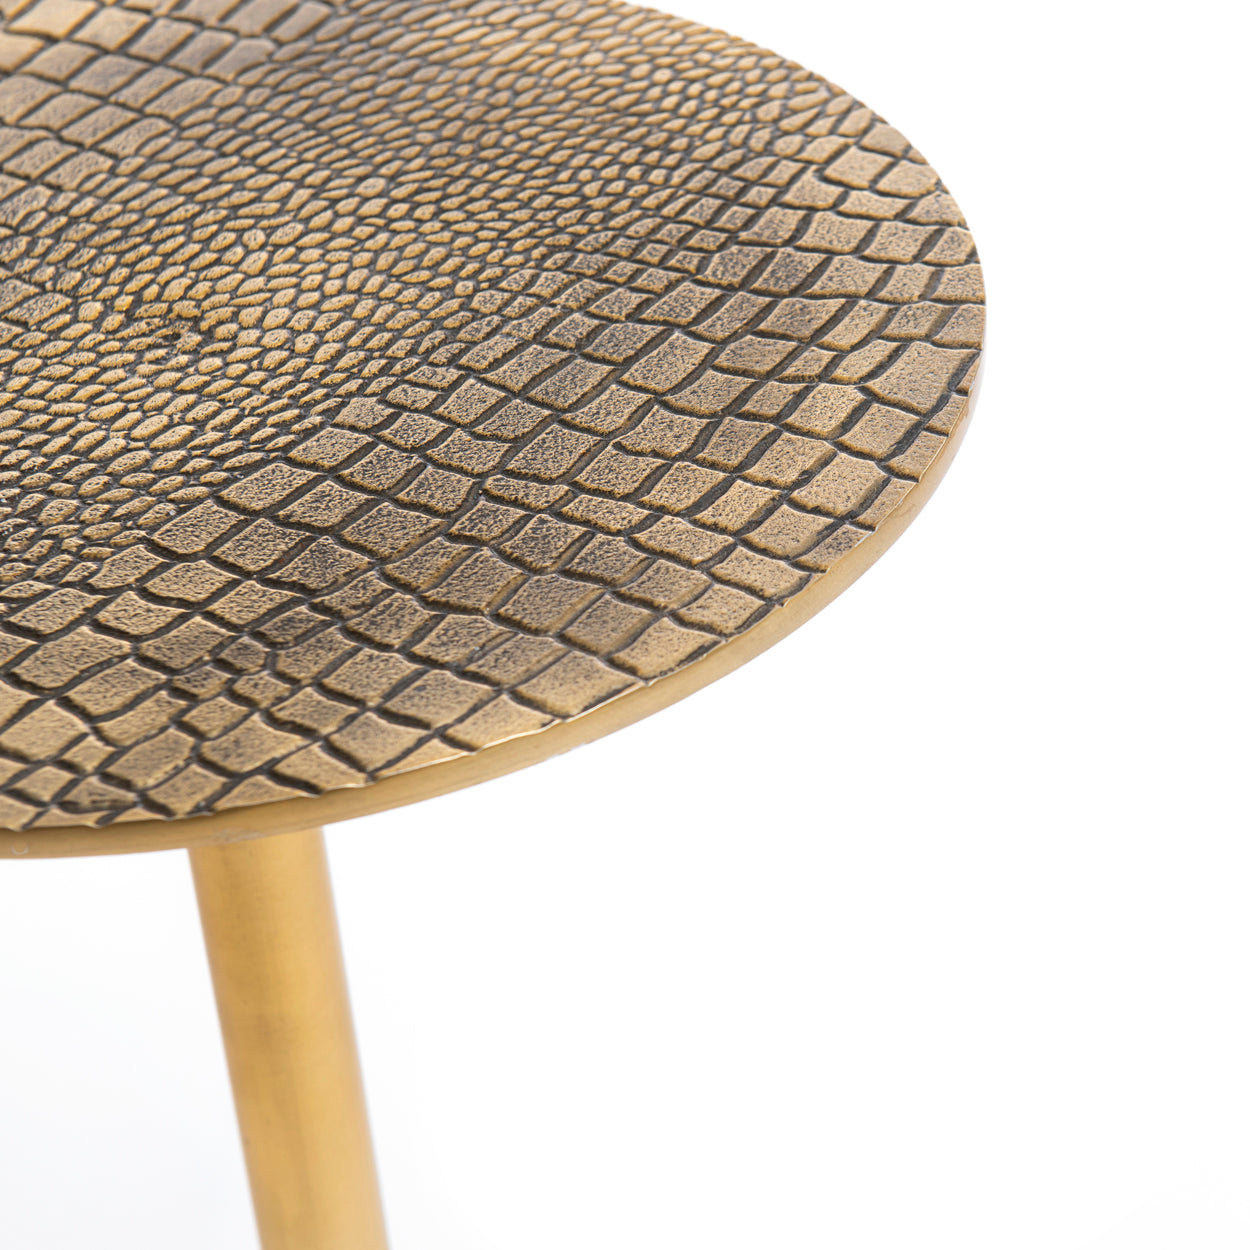 THE CROCO Side Table half-top view